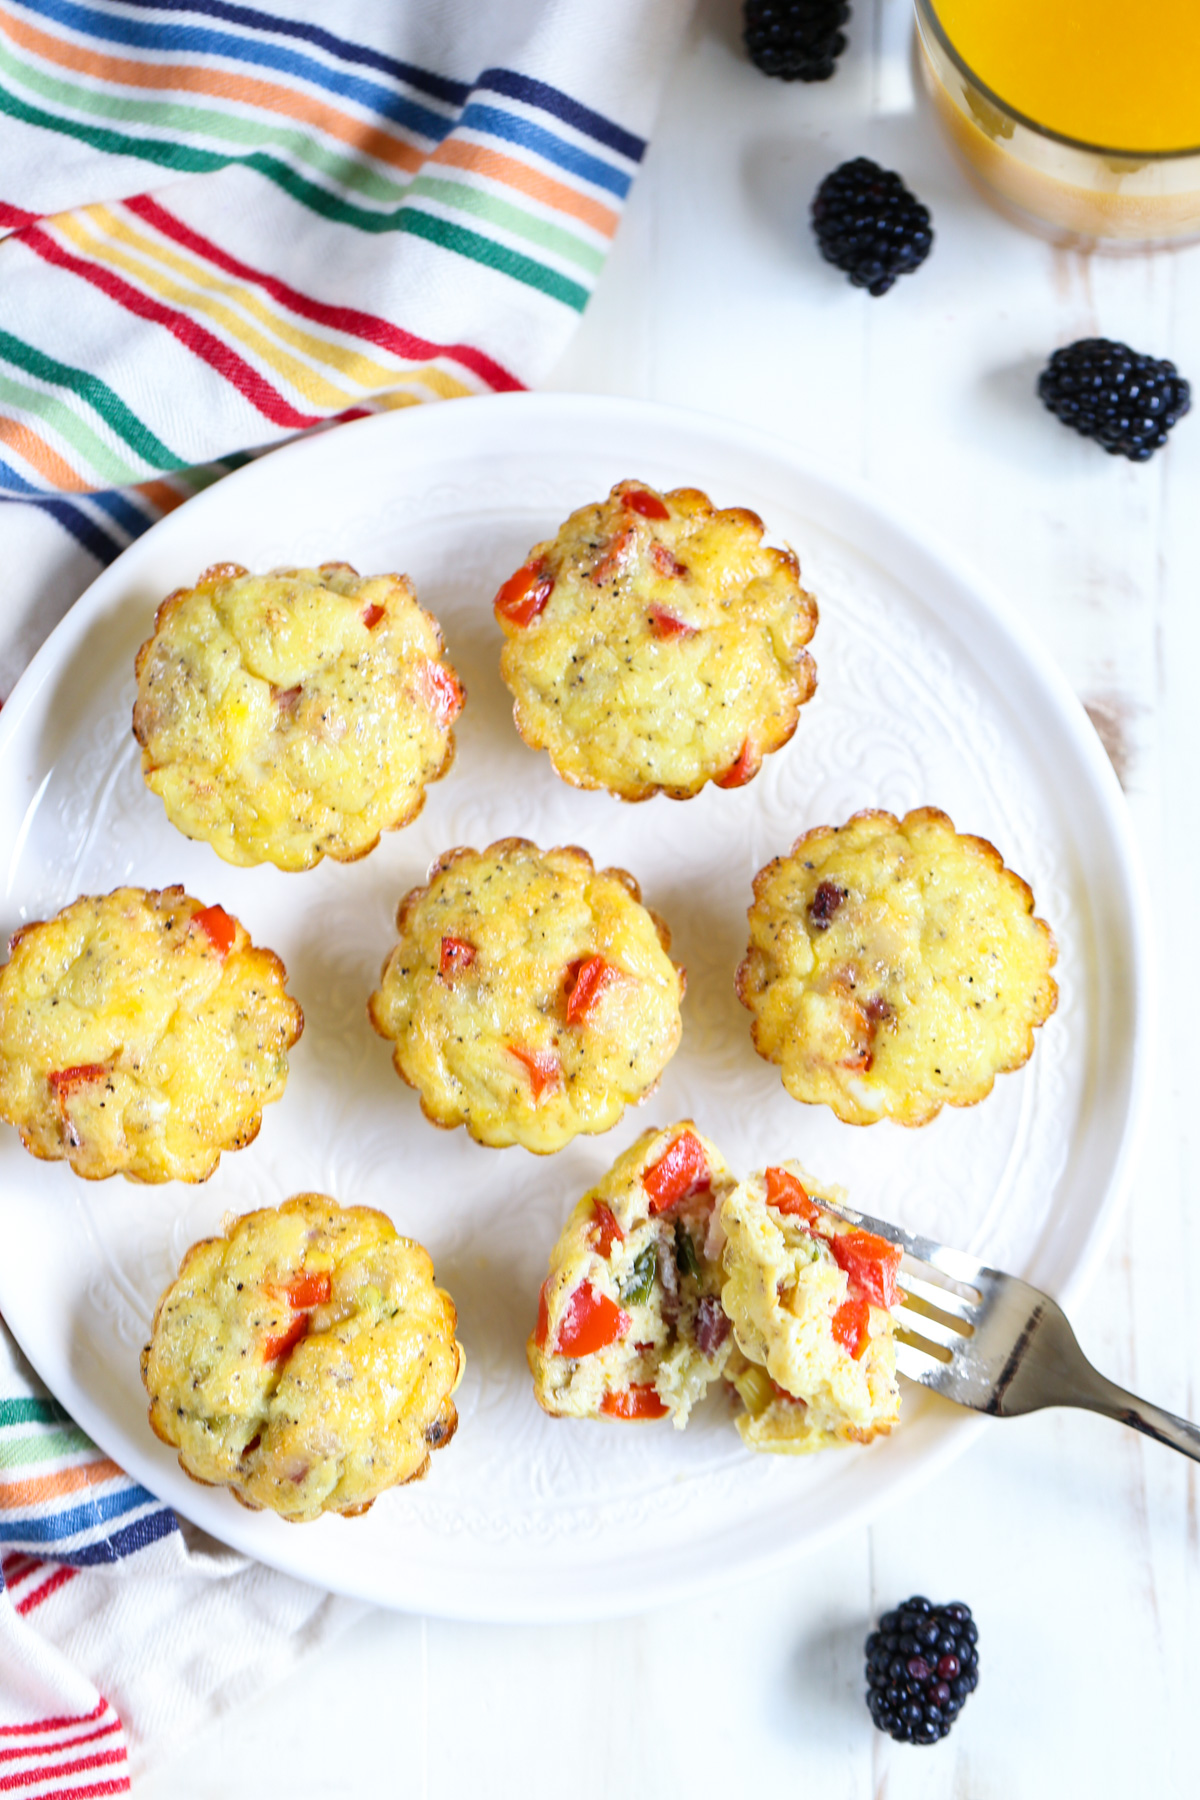 Egg muffins, or omelet cups, on a white plate.